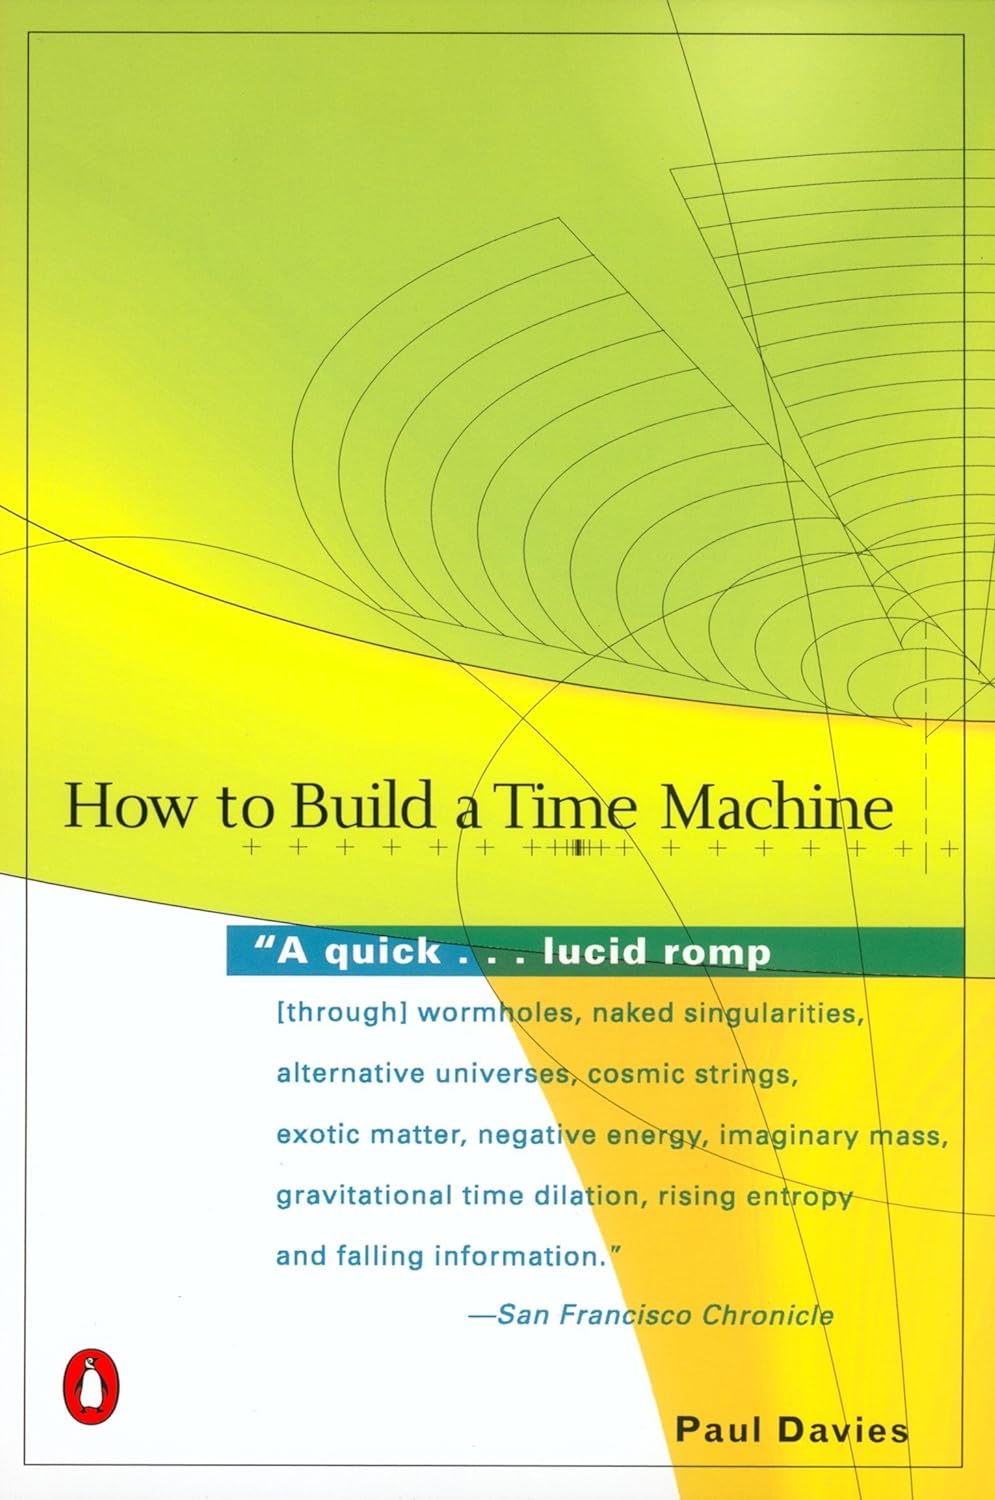 How to Build a Time Machine by Paul Davies